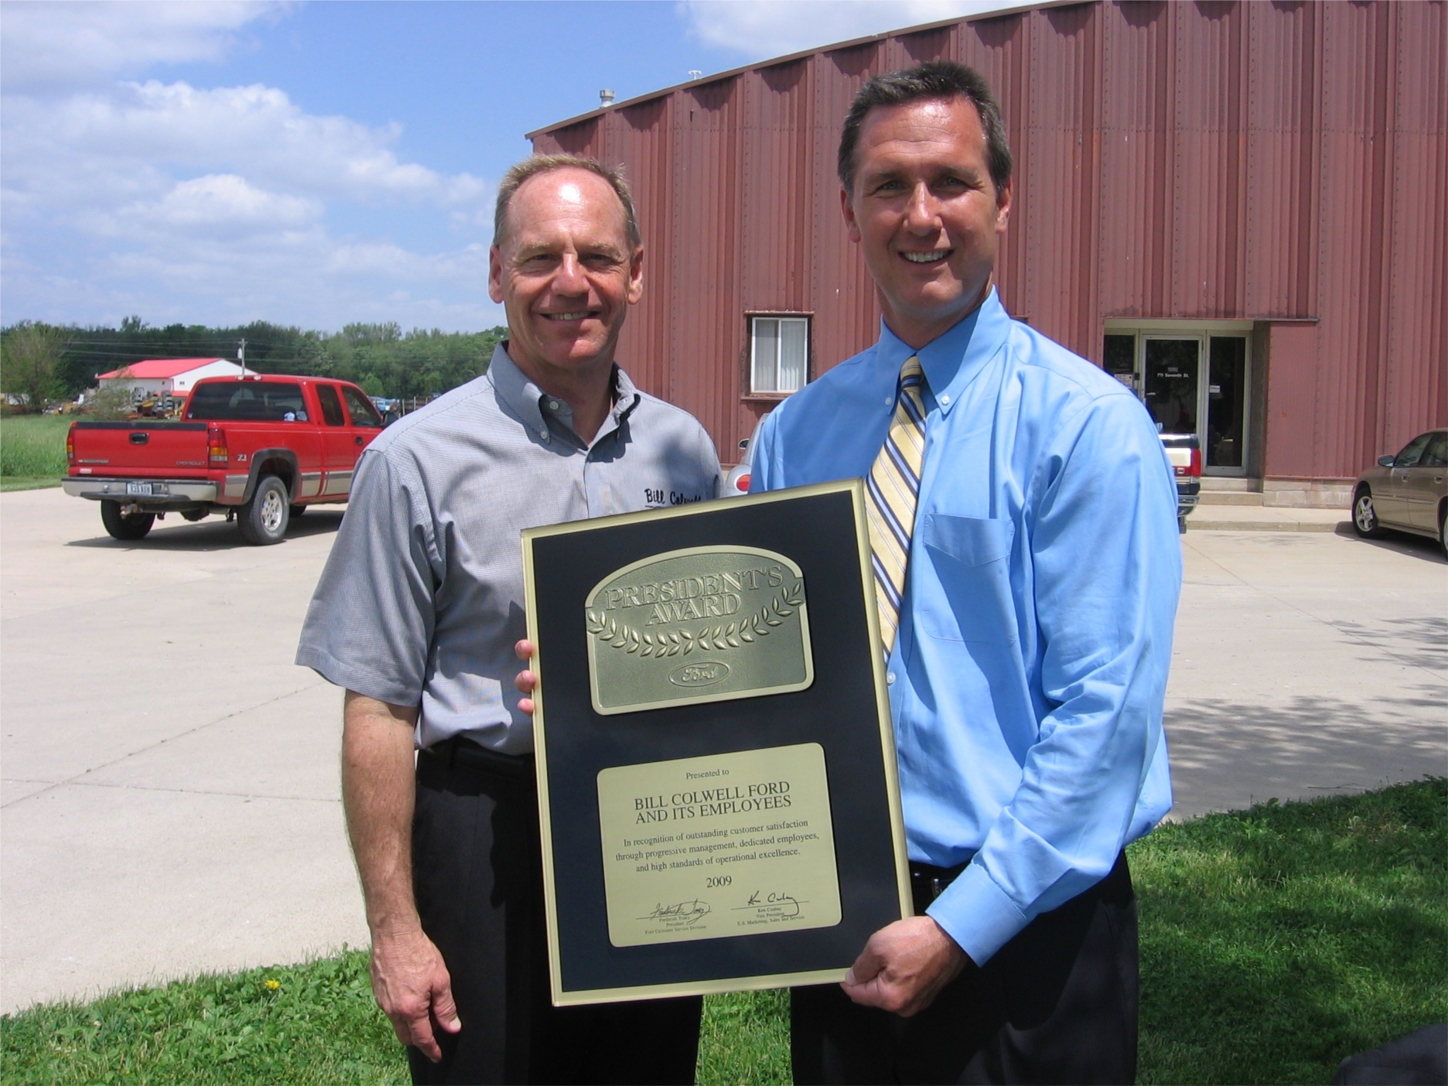 Bill Colwell Ford receives the Presidents Award from the Ford Motor Company. The award recognizes dealers for excellence in providing outstanding customer service and satisfaction. Bill Colwell Ford won the President's Award in 1999, 2009, and 2011.